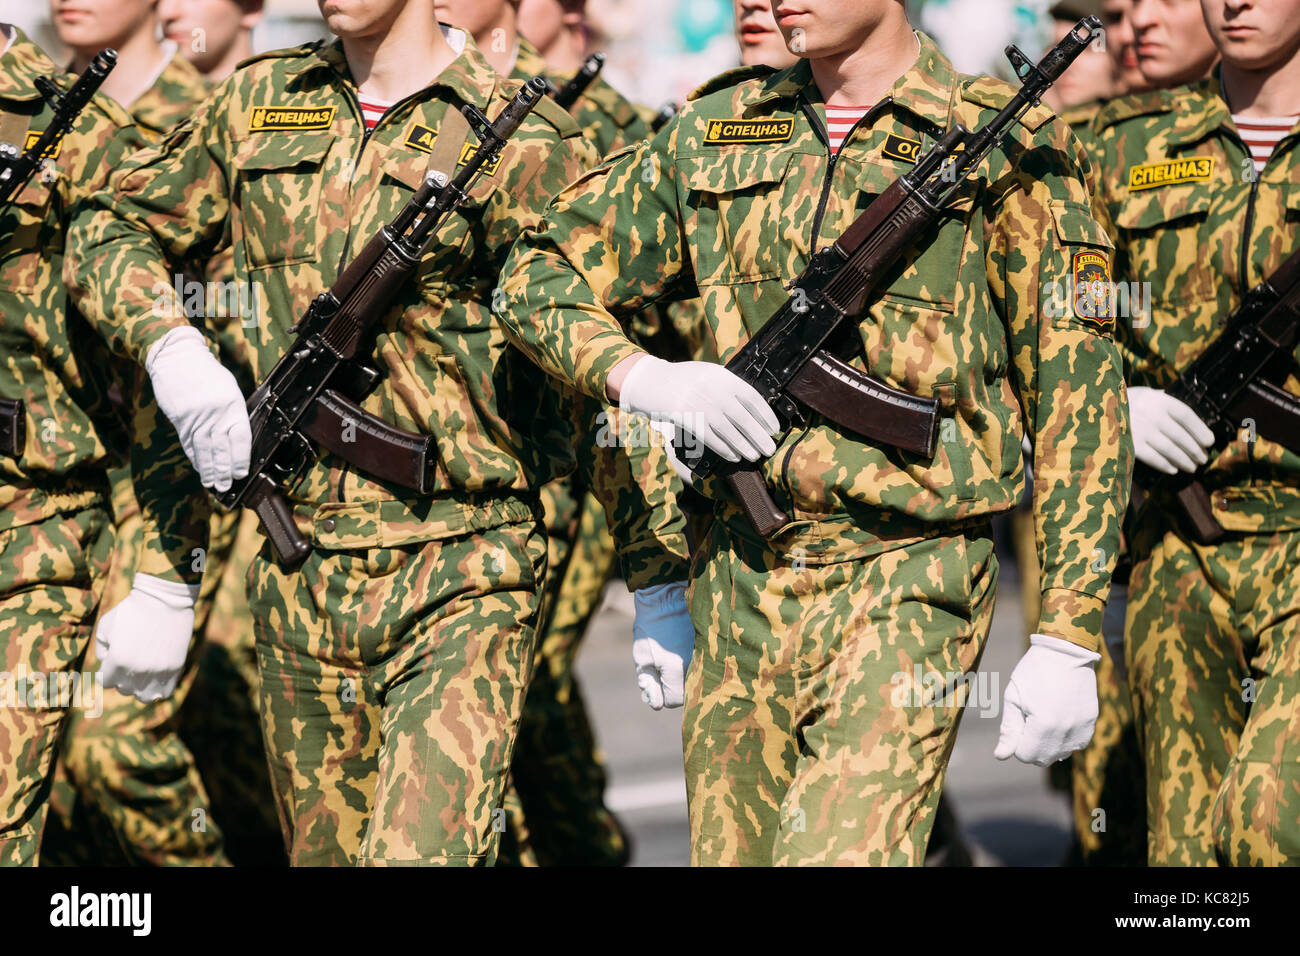 Celebration Victory Day 9 May, Gomel Homiel Belarus. Special Purpose Forces Or Spetsnaz, Close View Of Men Hands In White Gloves With The Weapon Guns. Stock Photo